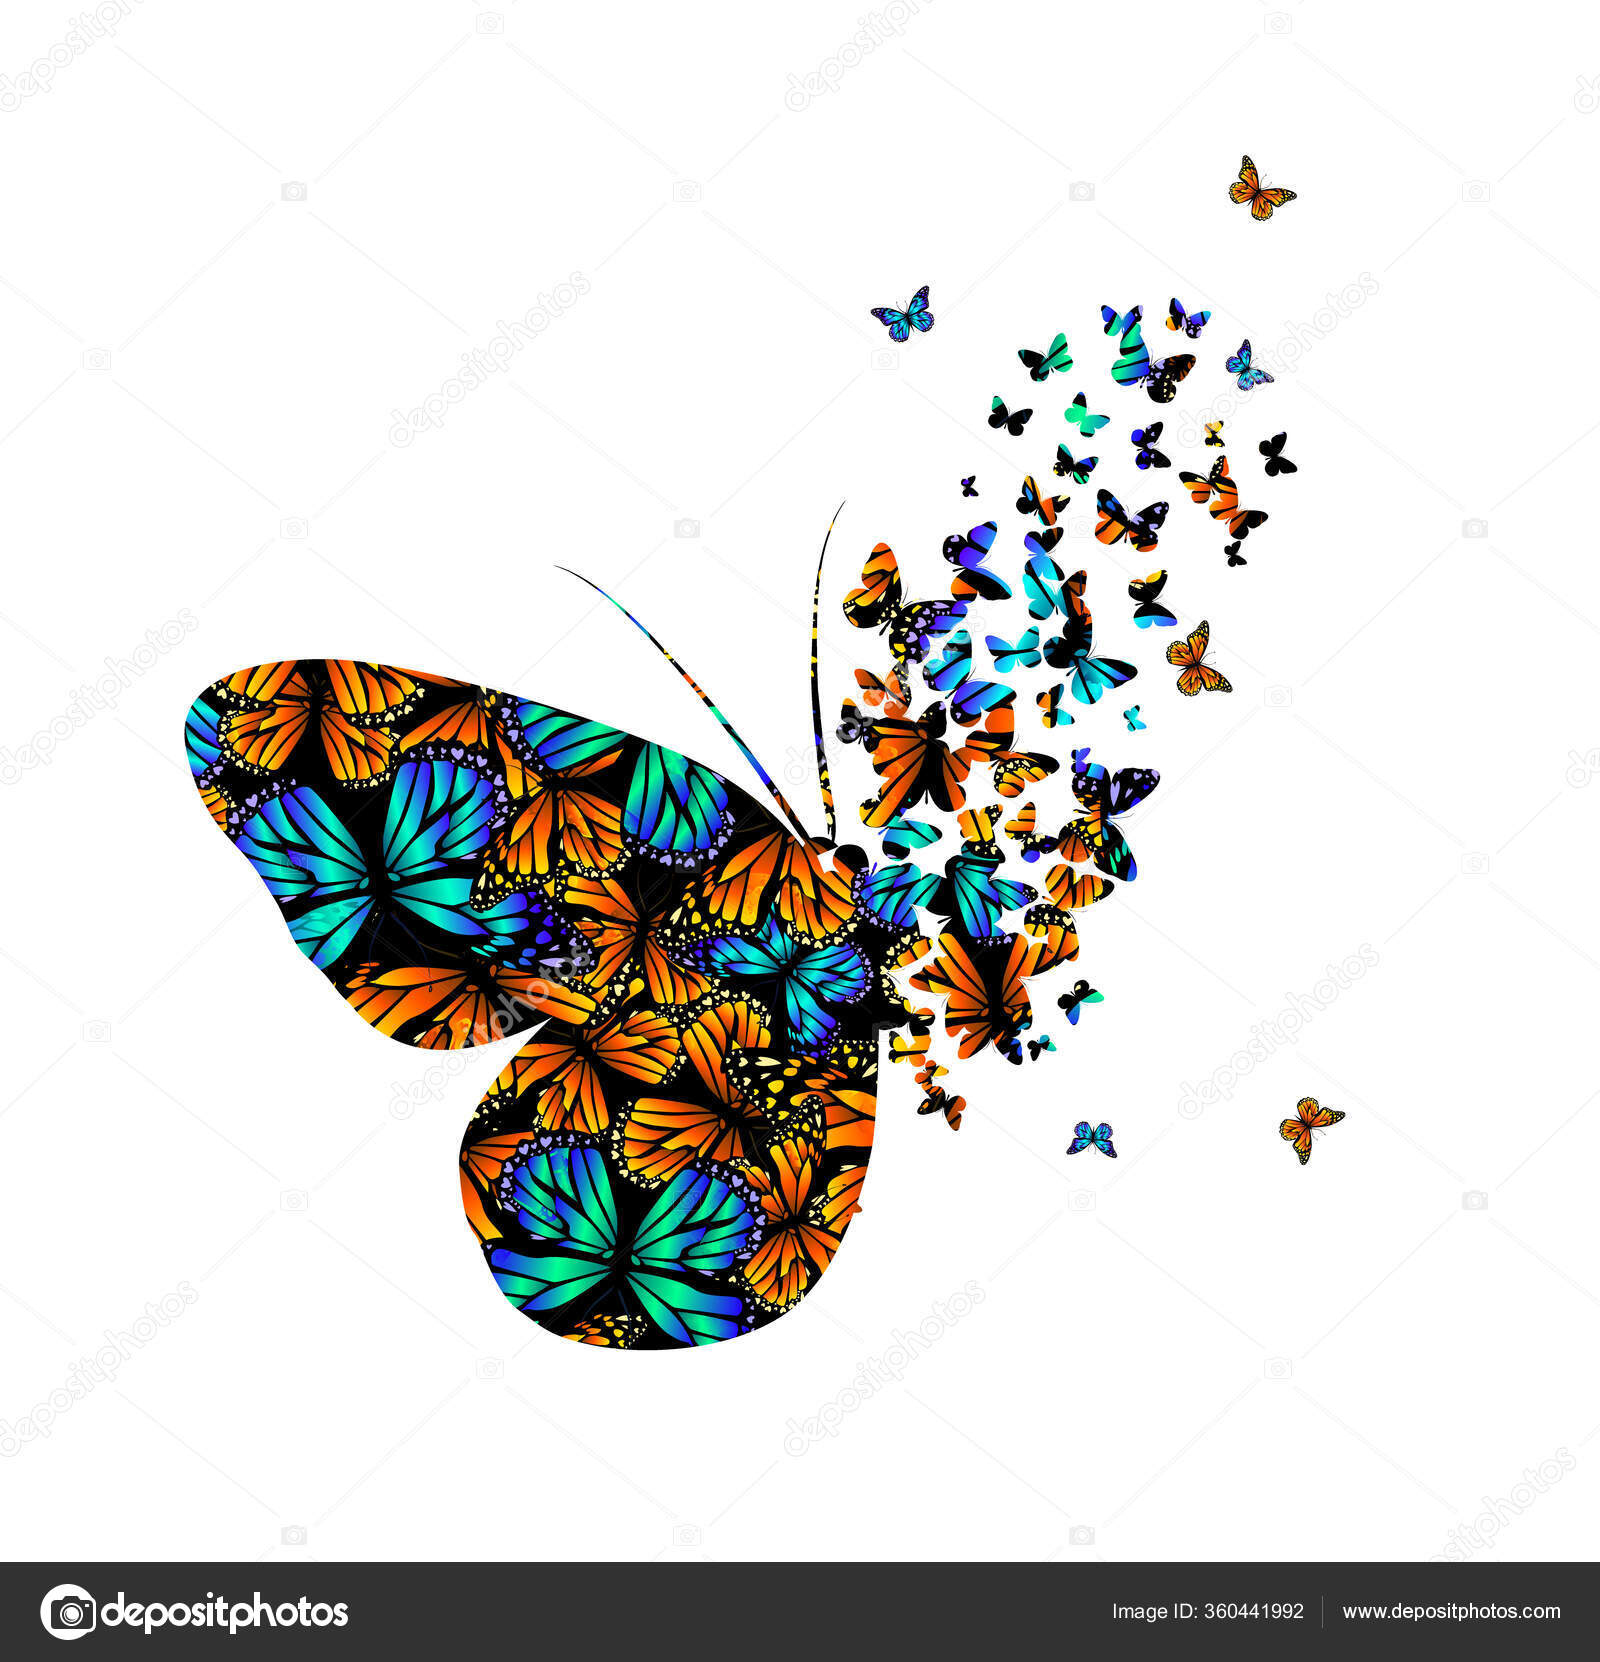 https://st3.depositphotos.com/1004989/36044/v/1600/depositphotos_360441992-stock-illustration-abstract-butterfly-multicolored-from-parts.jpg